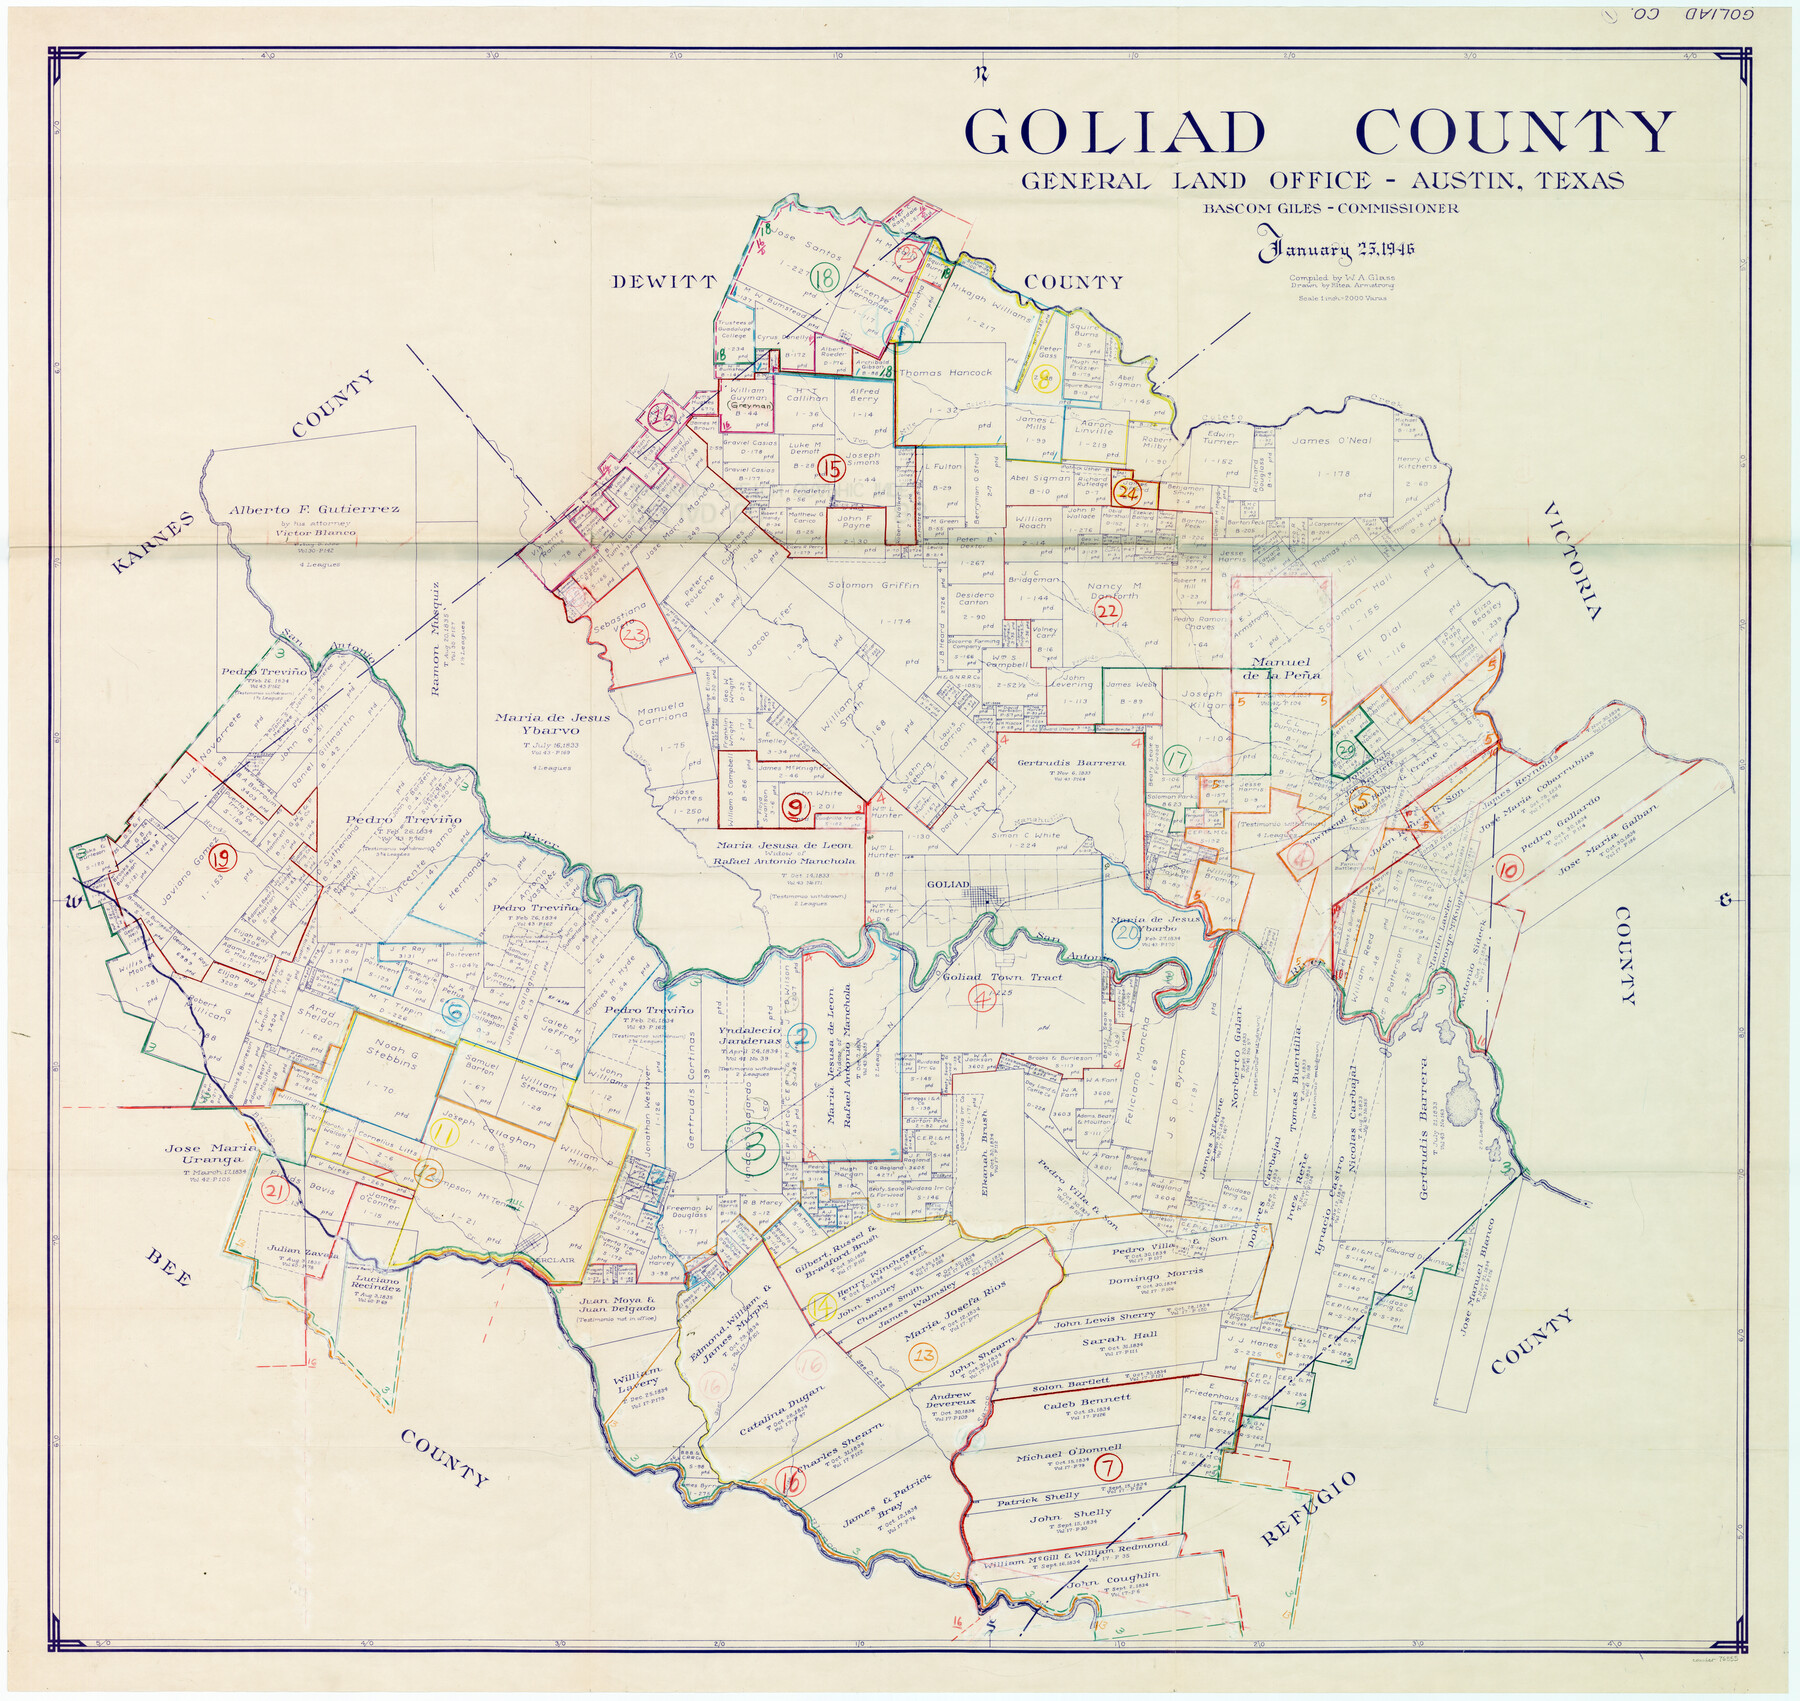 76555, Goliad County Working Sketch Graphic Index, General Map Collection